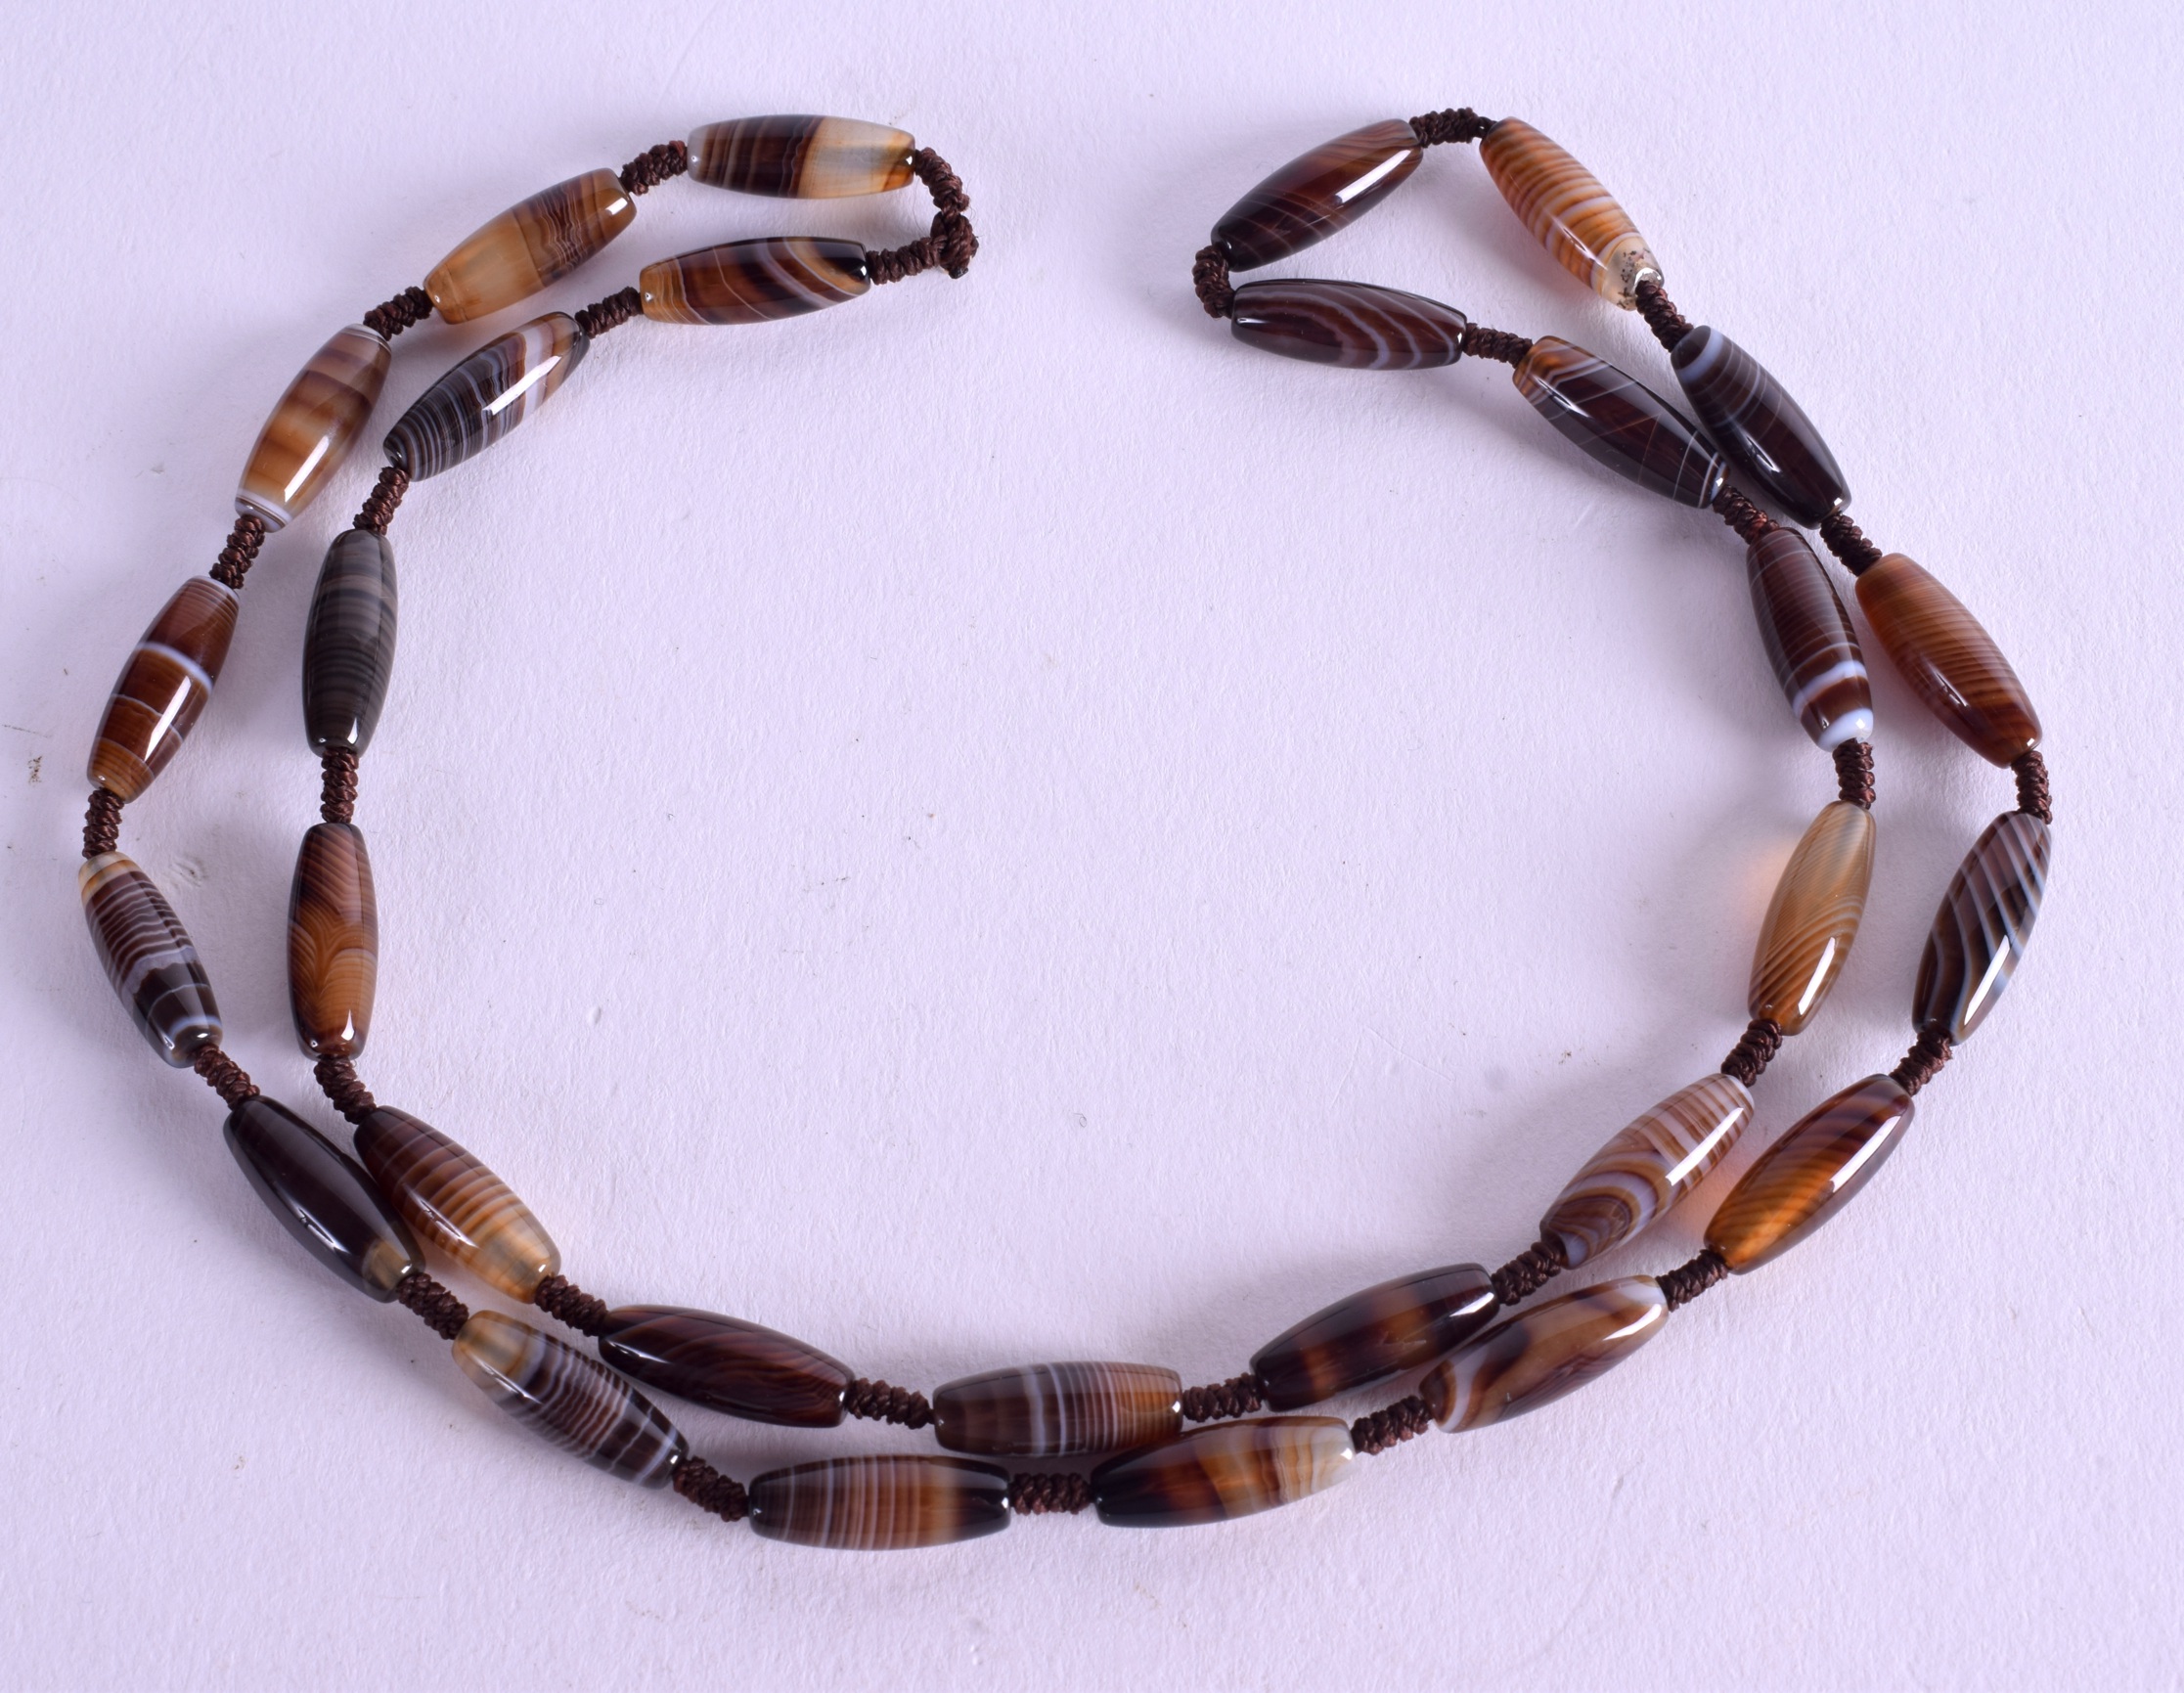 A BANDED AGATE NECKLACE. 56 cm long.